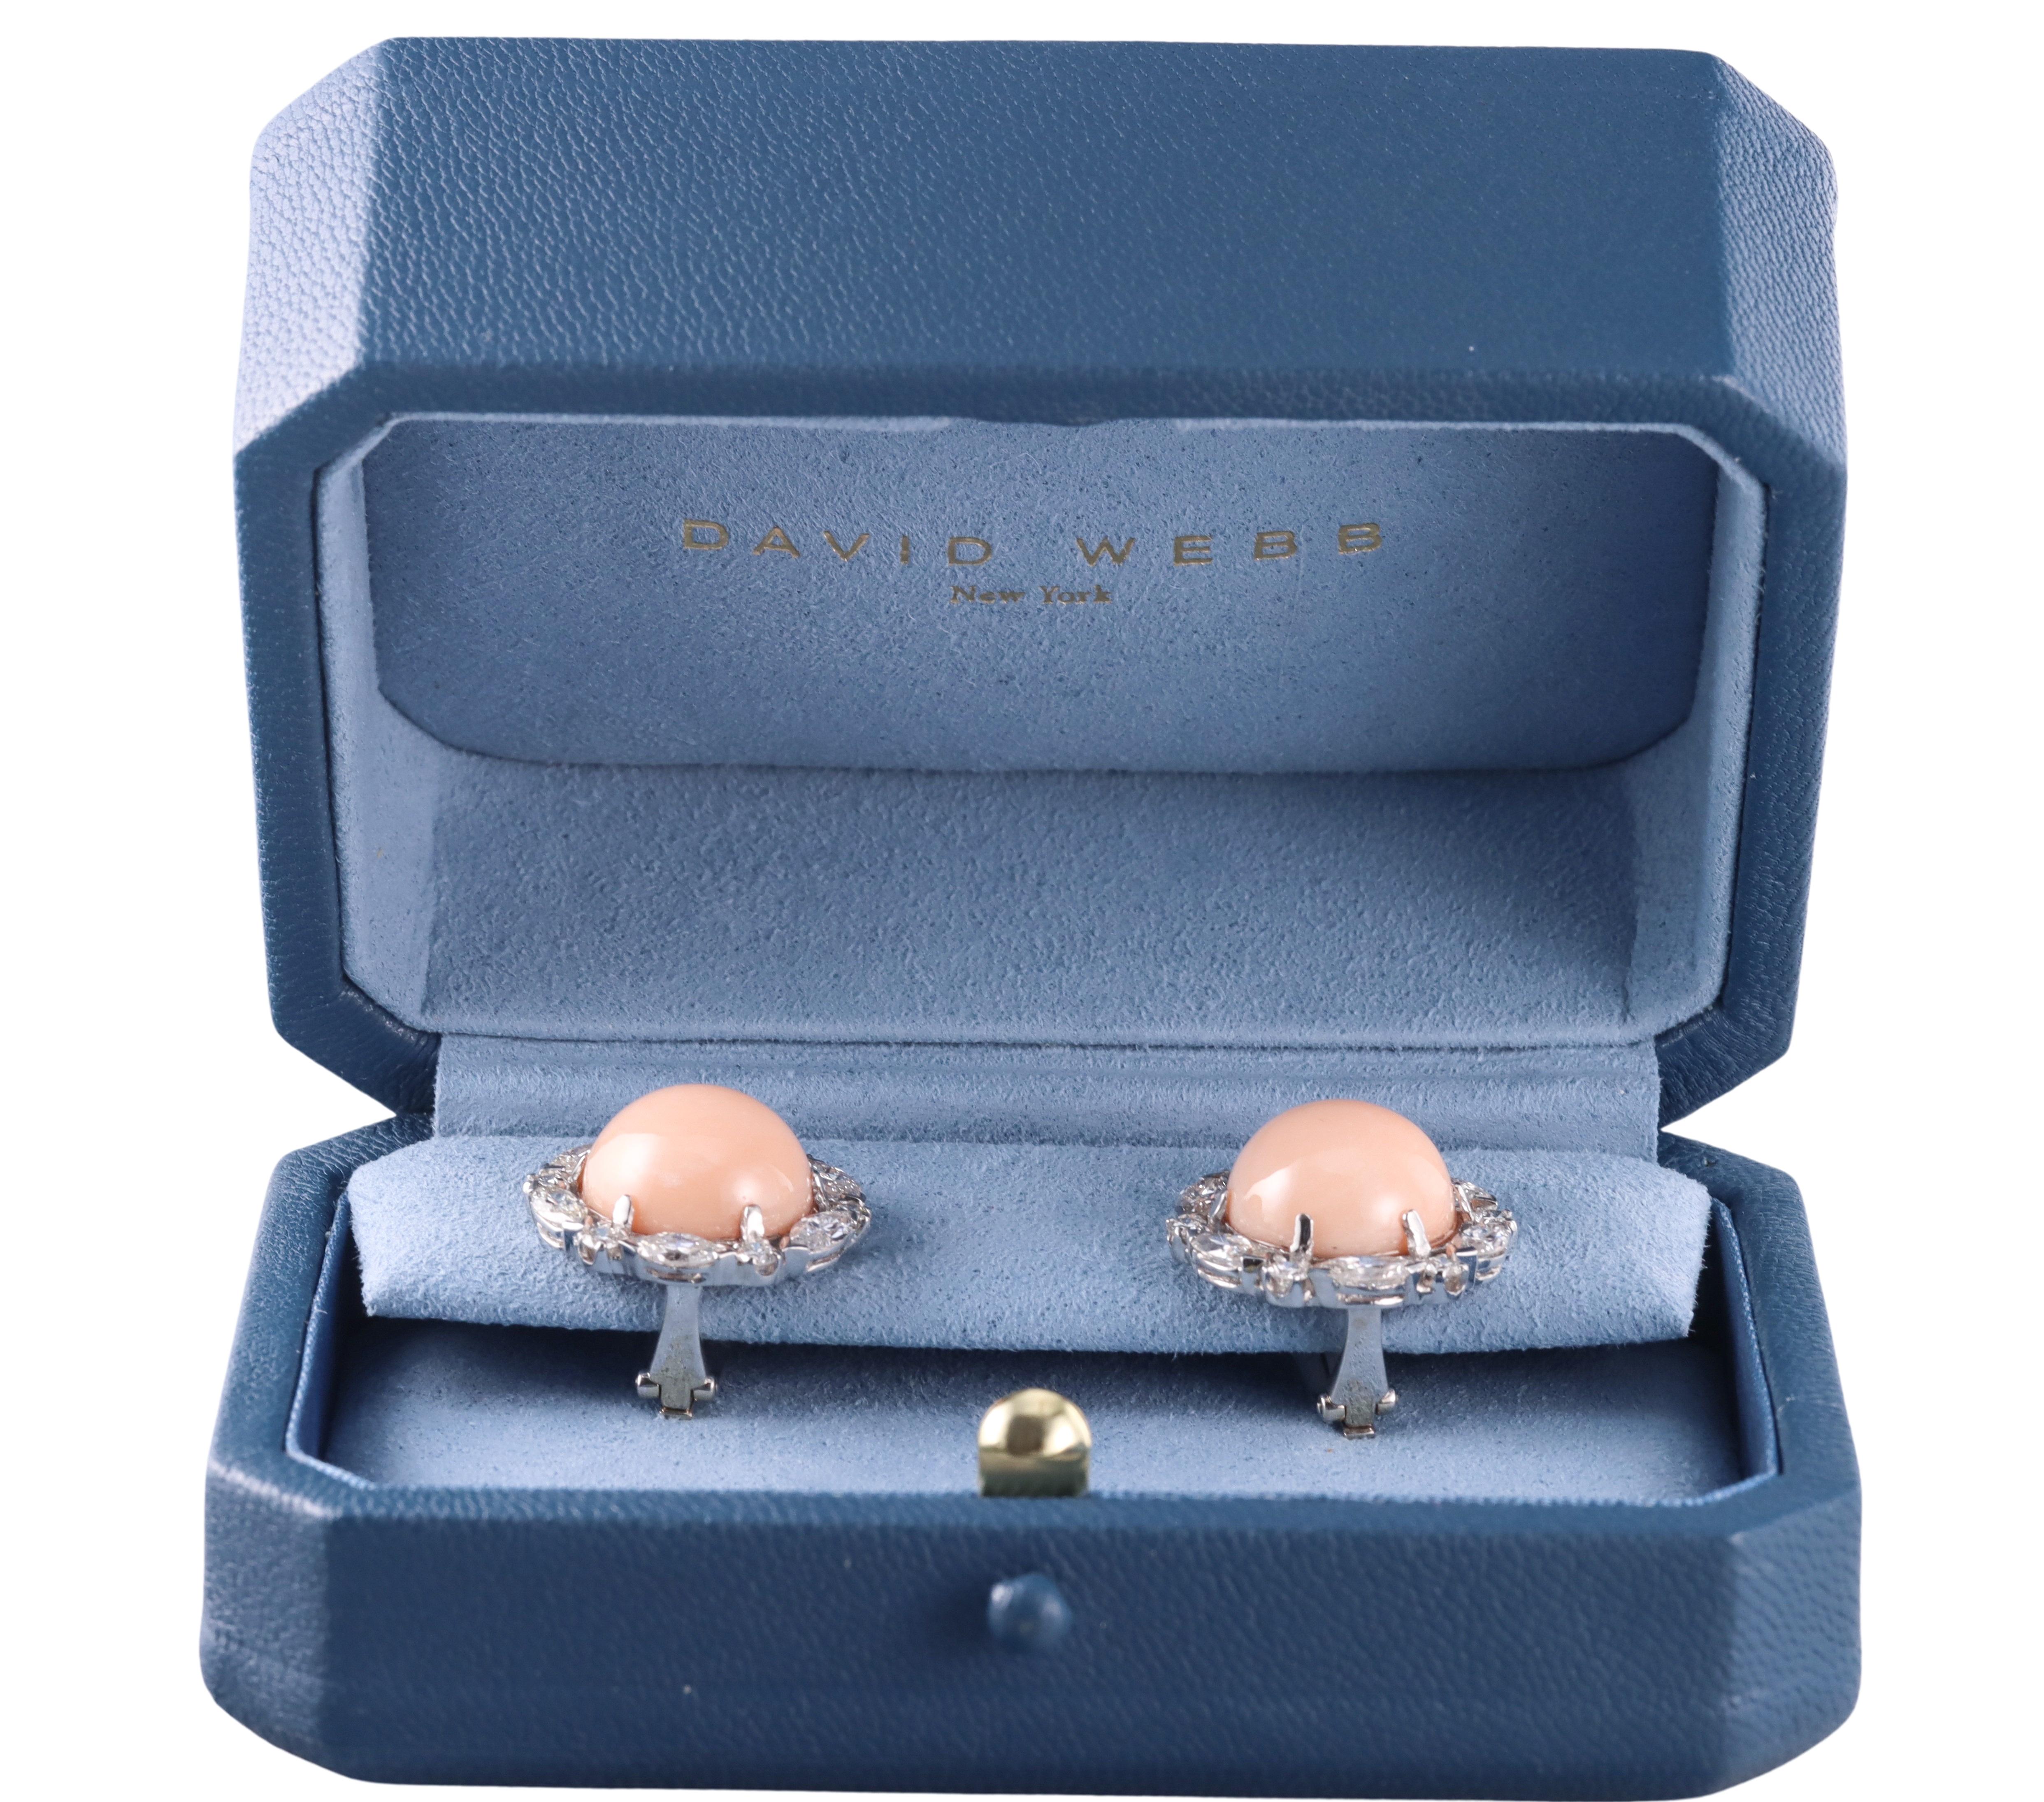 Pair of exquisite and classic button earrings, crafted by David Webb in 18k gold and platinum. The earrings are set with center 14.5mm angel skin corals, surrounded with alternating marquise and round brilliant diamonds - total approximately 3.50cts